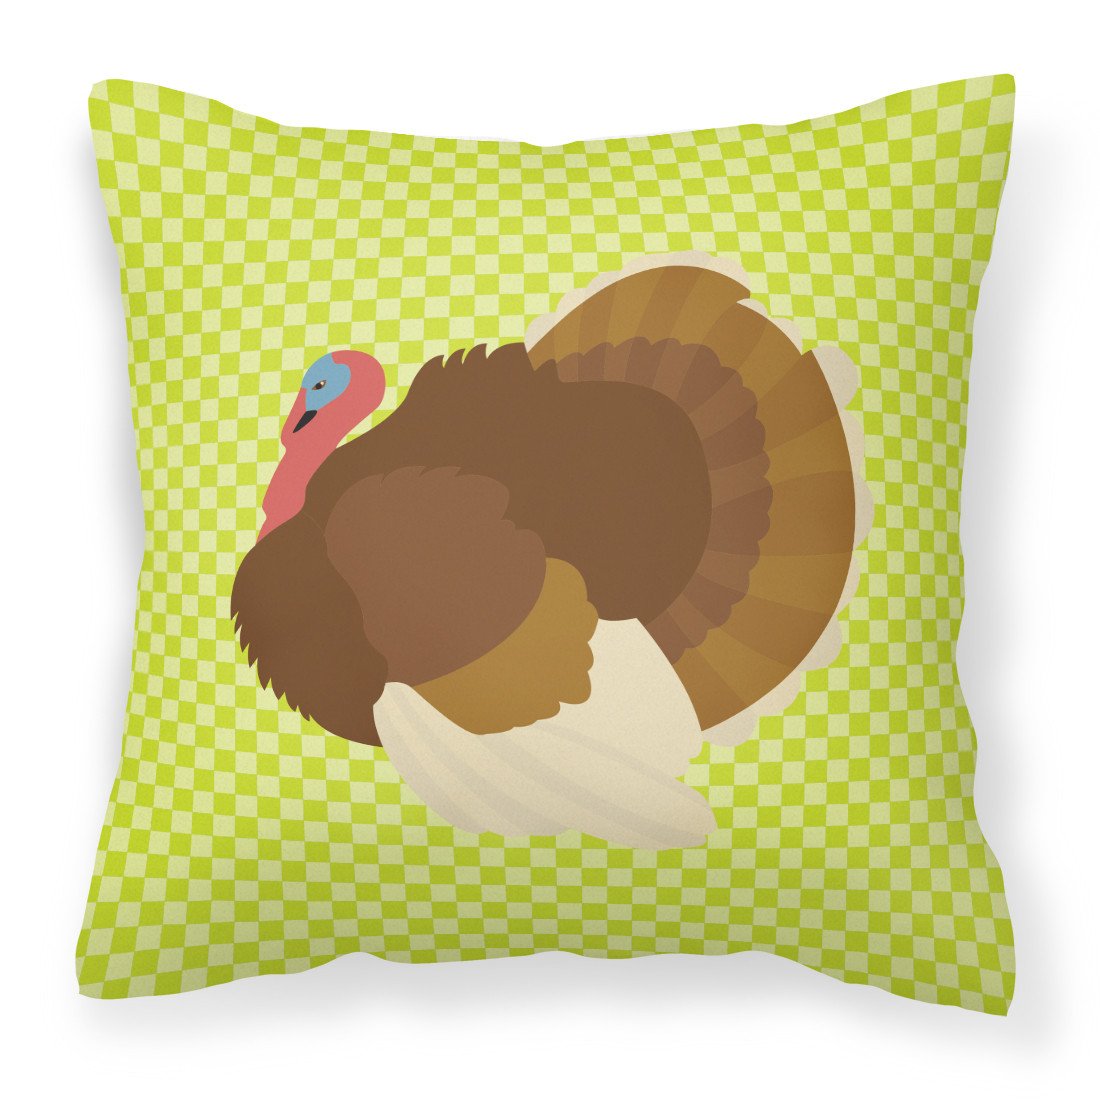 French Turkey Dindon Green Fabric Decorative Pillow BB7816PW1818 by Caroline's Treasures